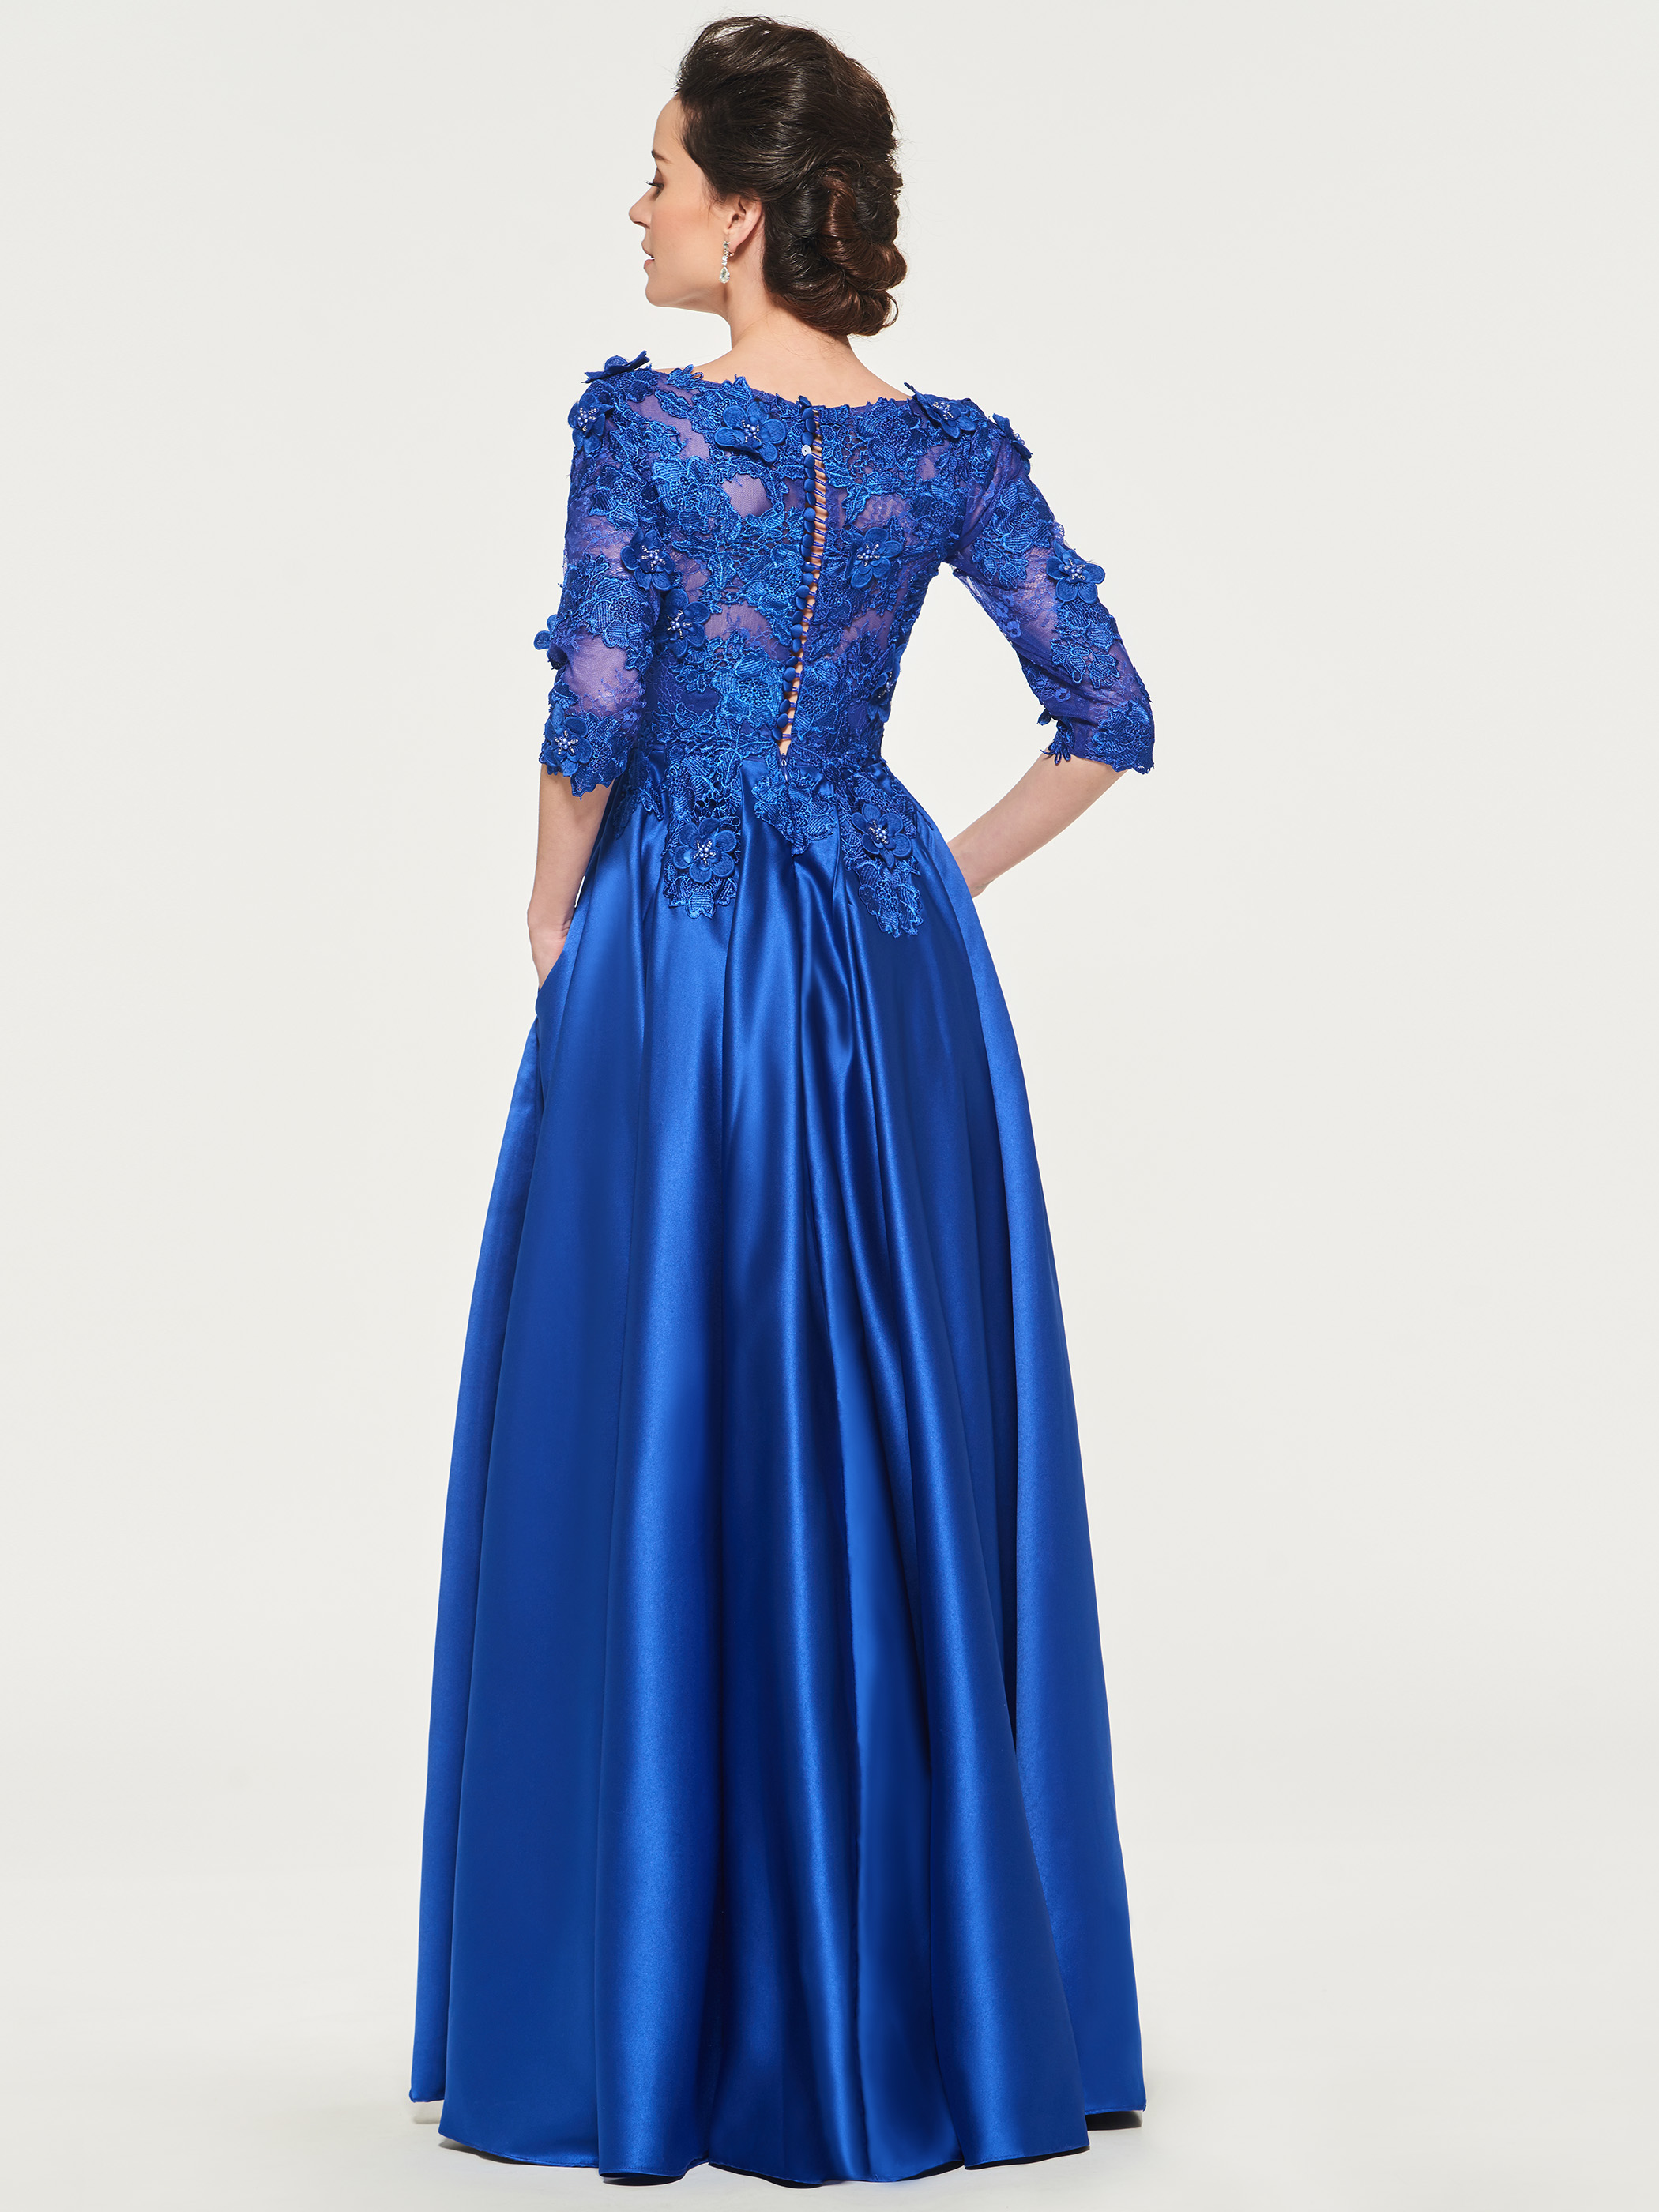 Half Sleeves Floor-Length V-Neck A-Line Wedding Party Dress Appliques Beading Half Sleeves Mother of the Bride Dress Royal Blue